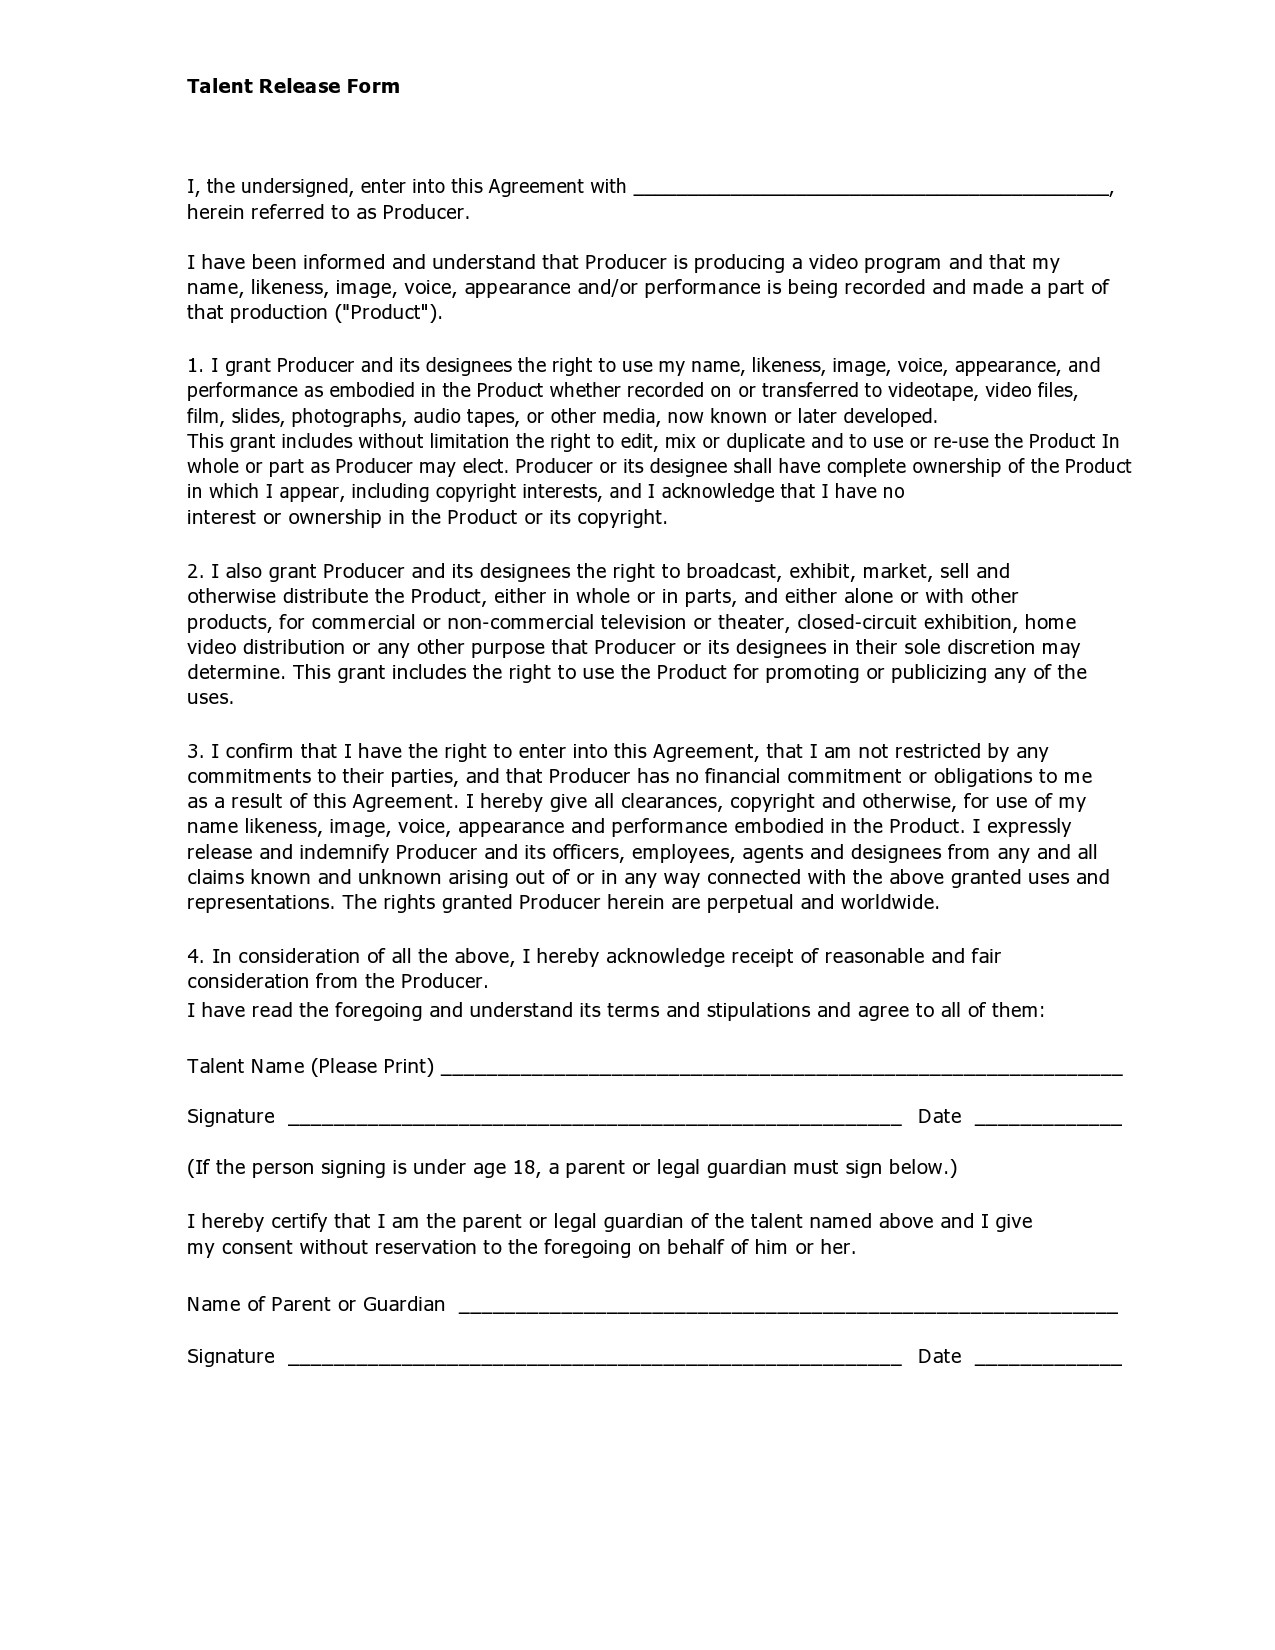 Free talent release form 34